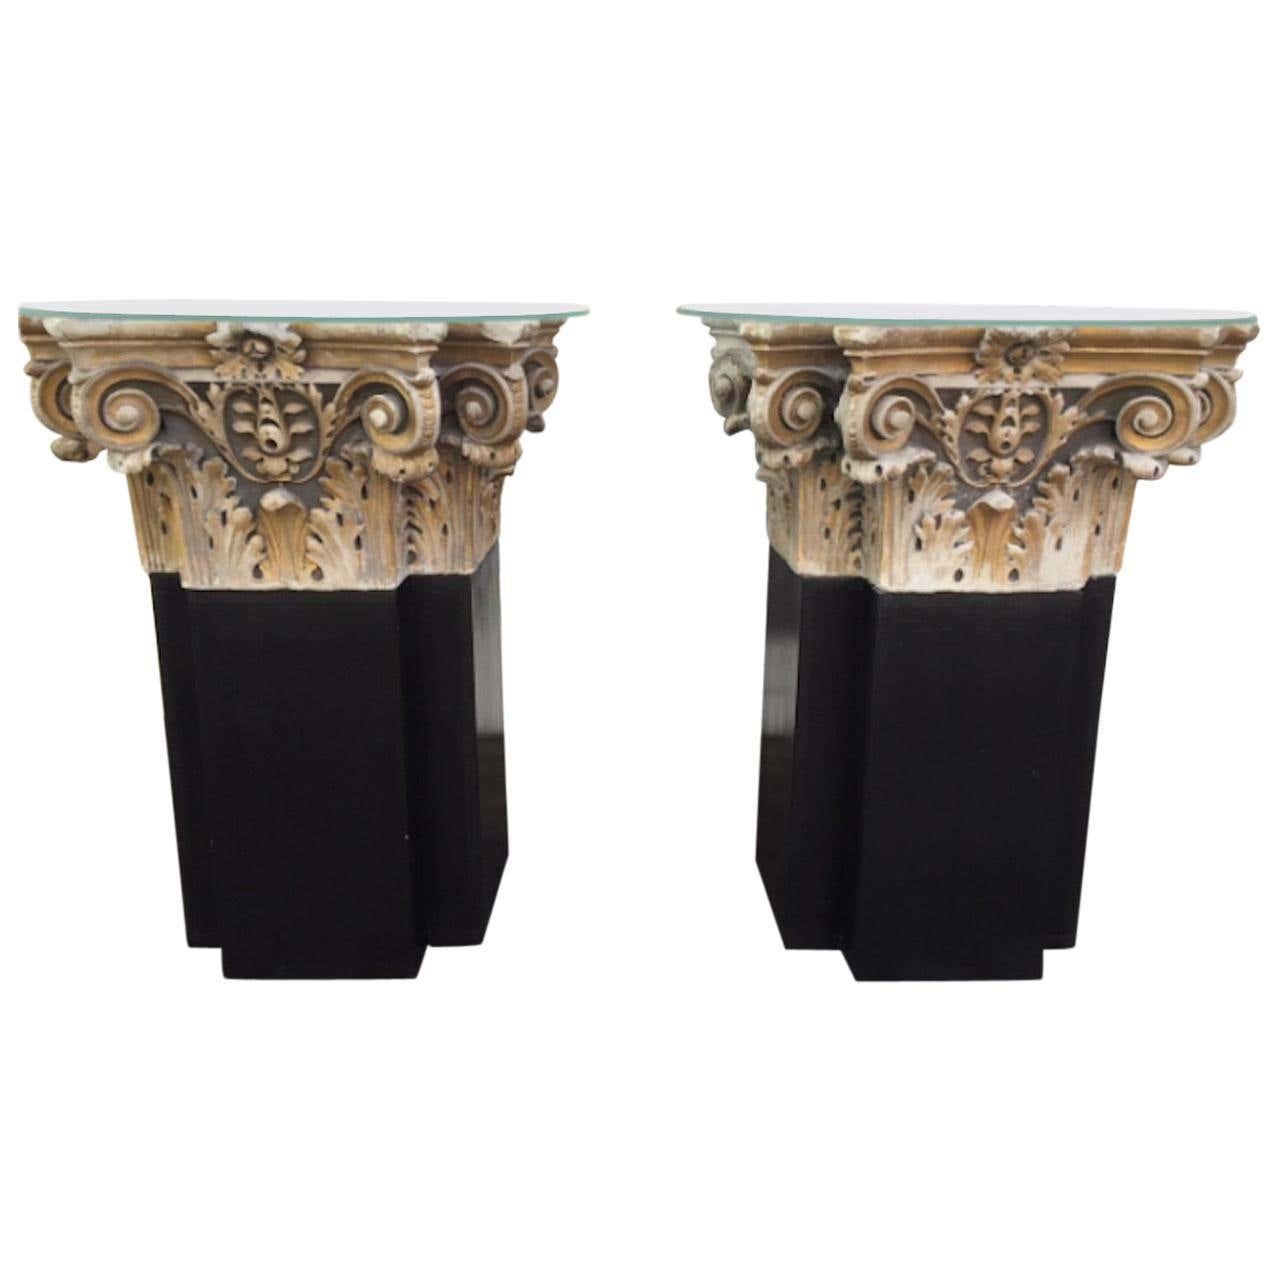 A pair of 18th century white marble and gold gilt columns tops from a Italy's church. Converted into side tables these beautiful crafted column feature excellent flawless carving of scrolls and foliage. Perfect for a interior or exterior use.